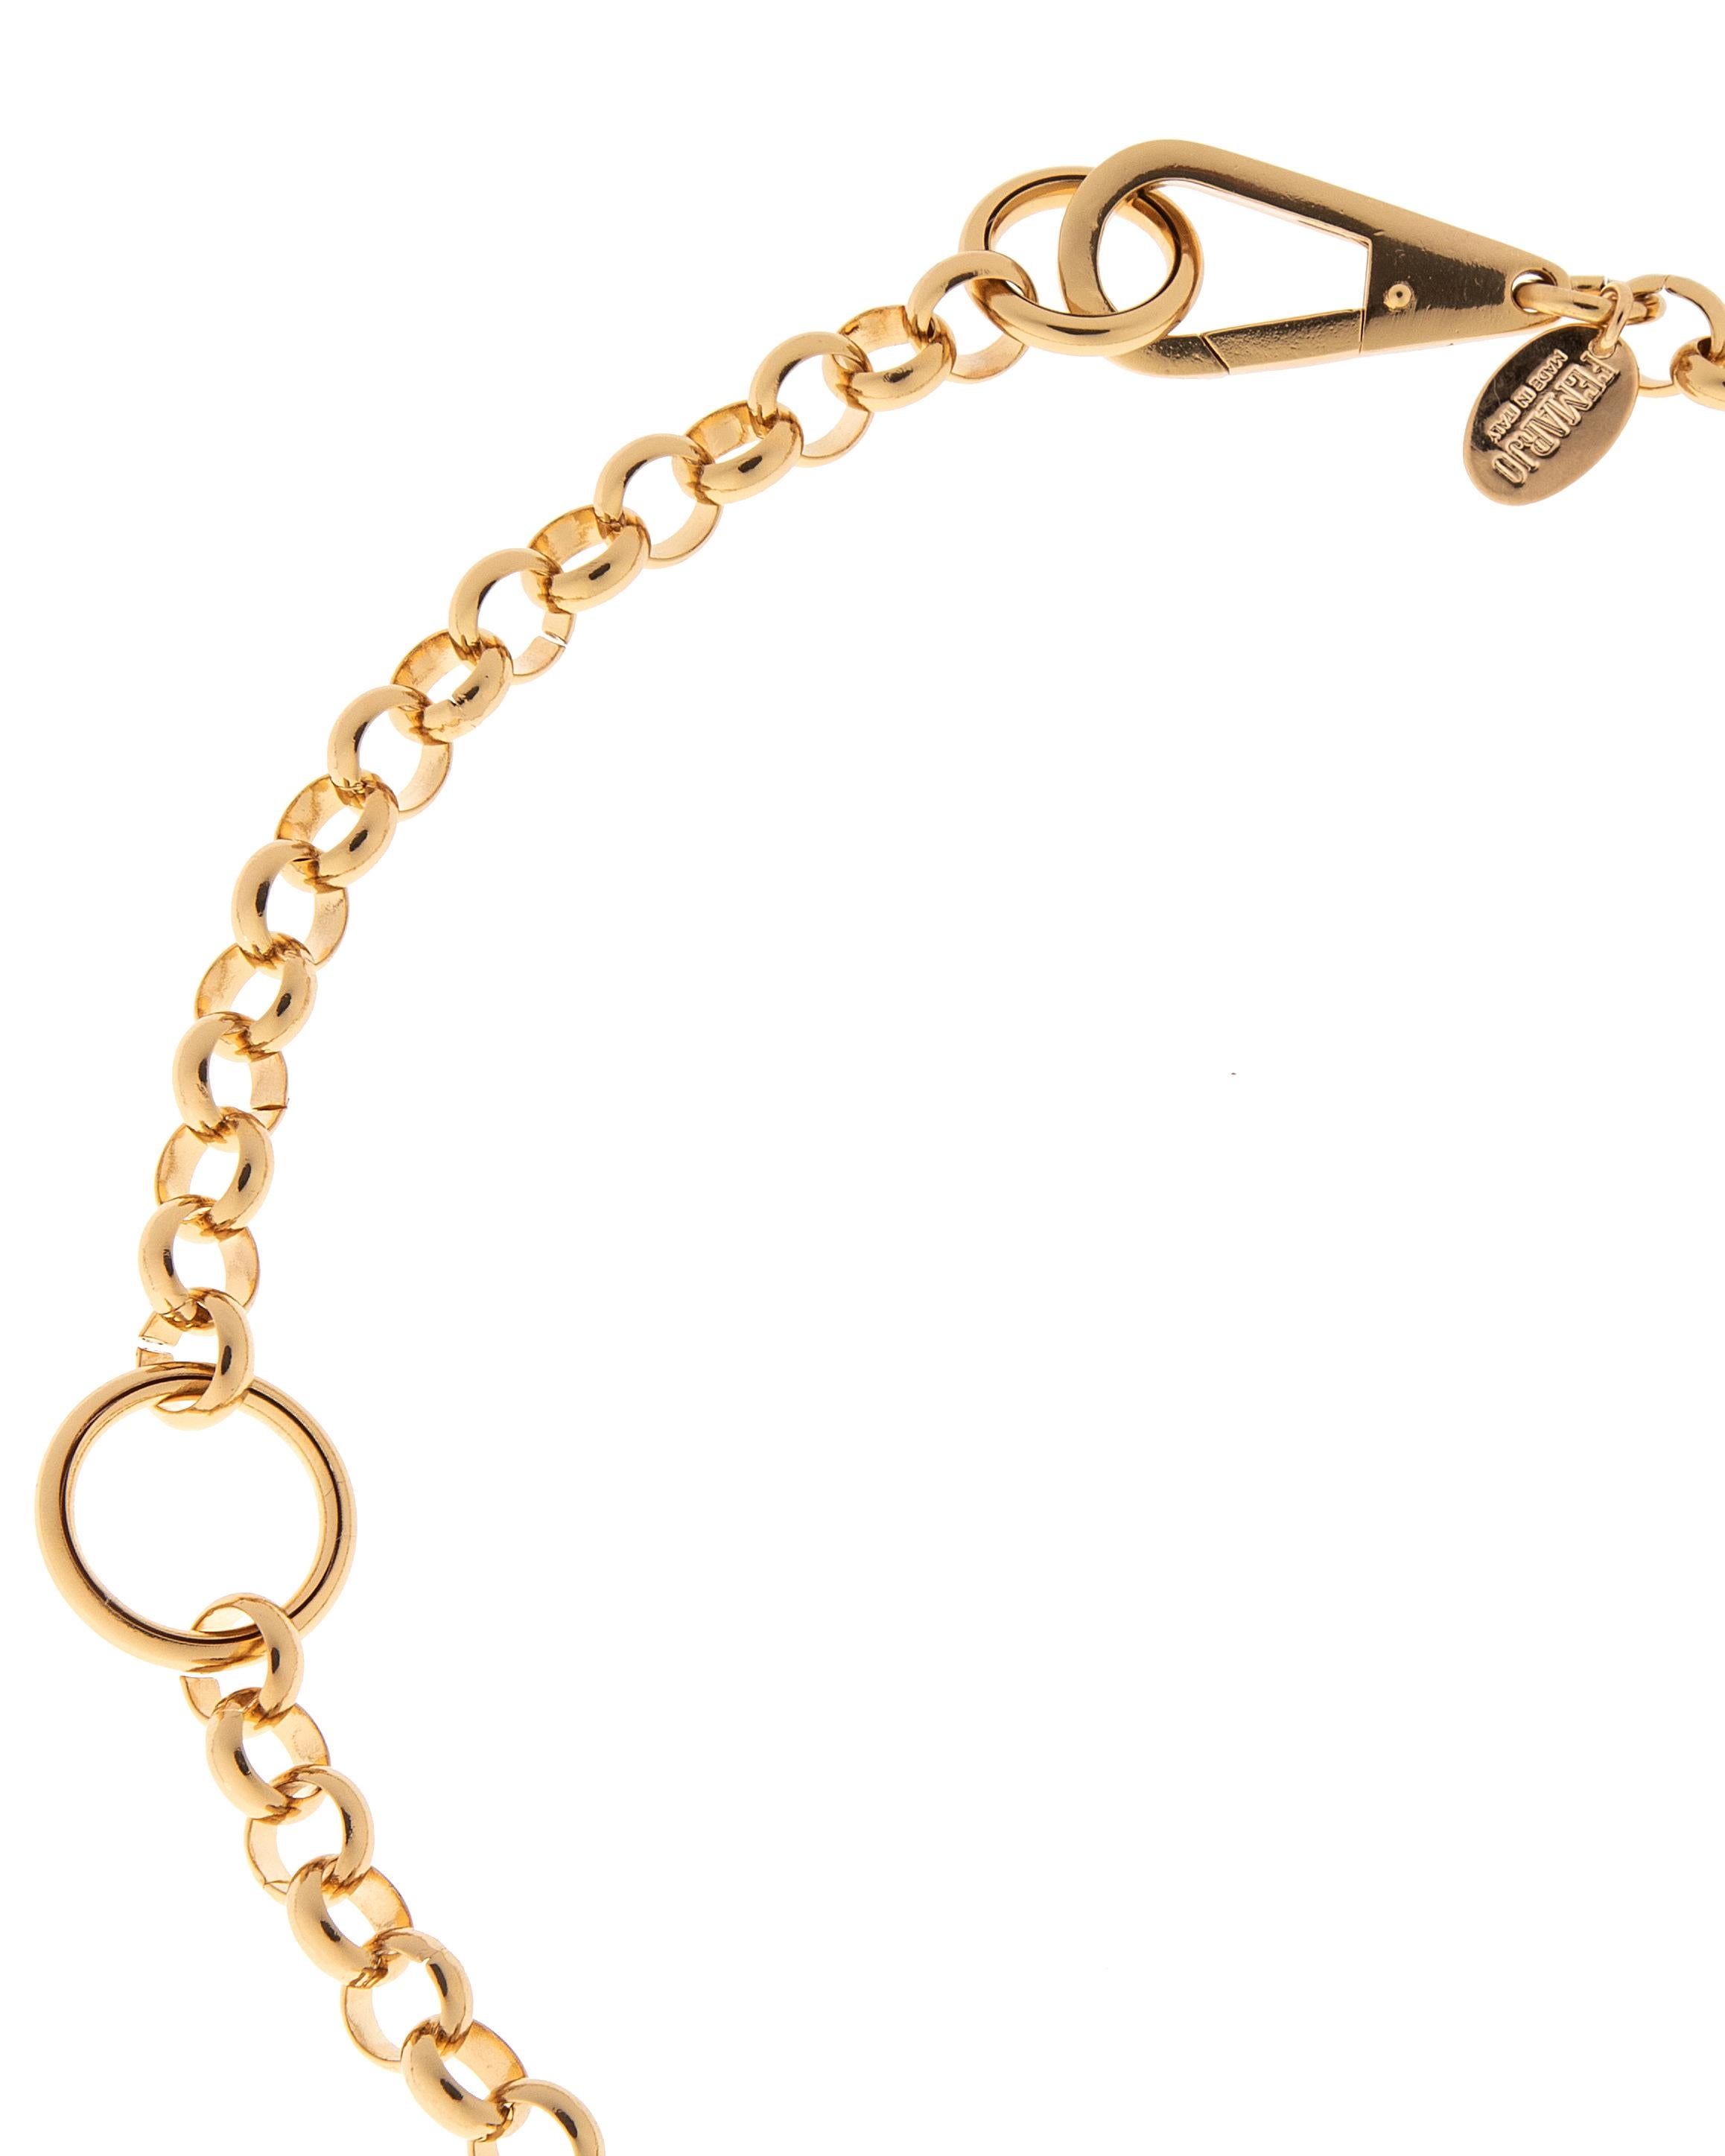 24kt gold plated brass chain necklace
Length 45 cm
Handmade in Italy
Nickel free, Hypoallergenic